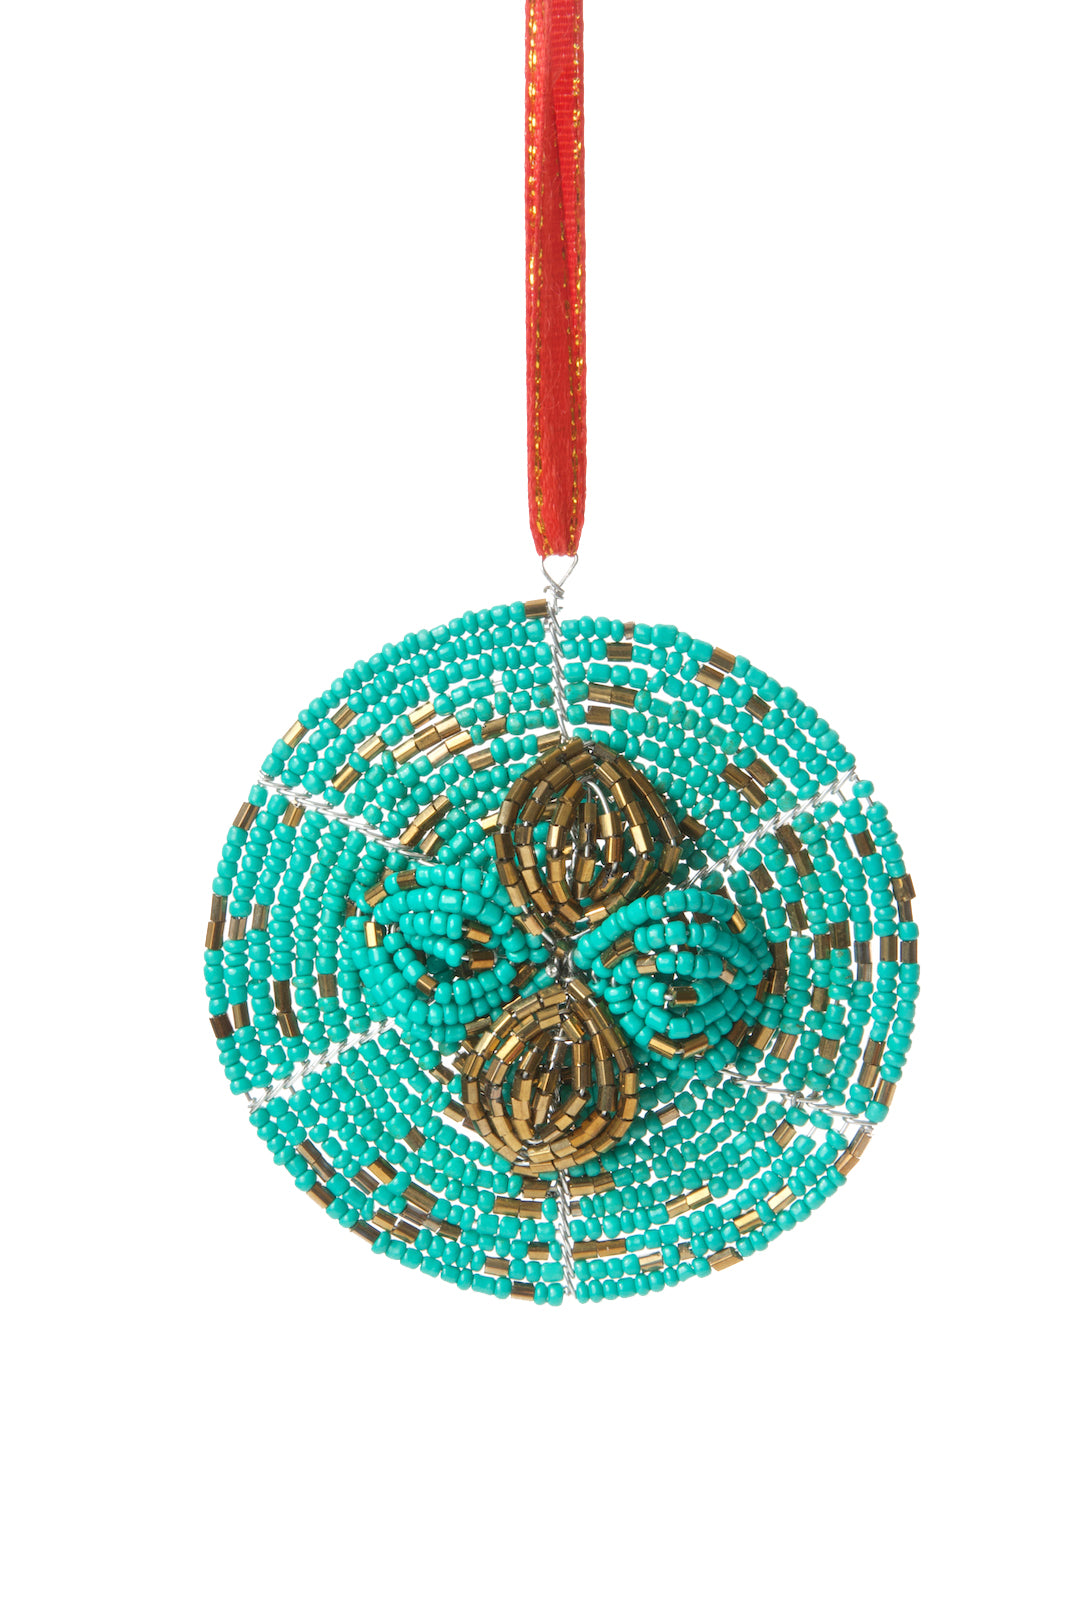 Beaded Wire Flower Ornament Turquoise Beaded Flower Ornament